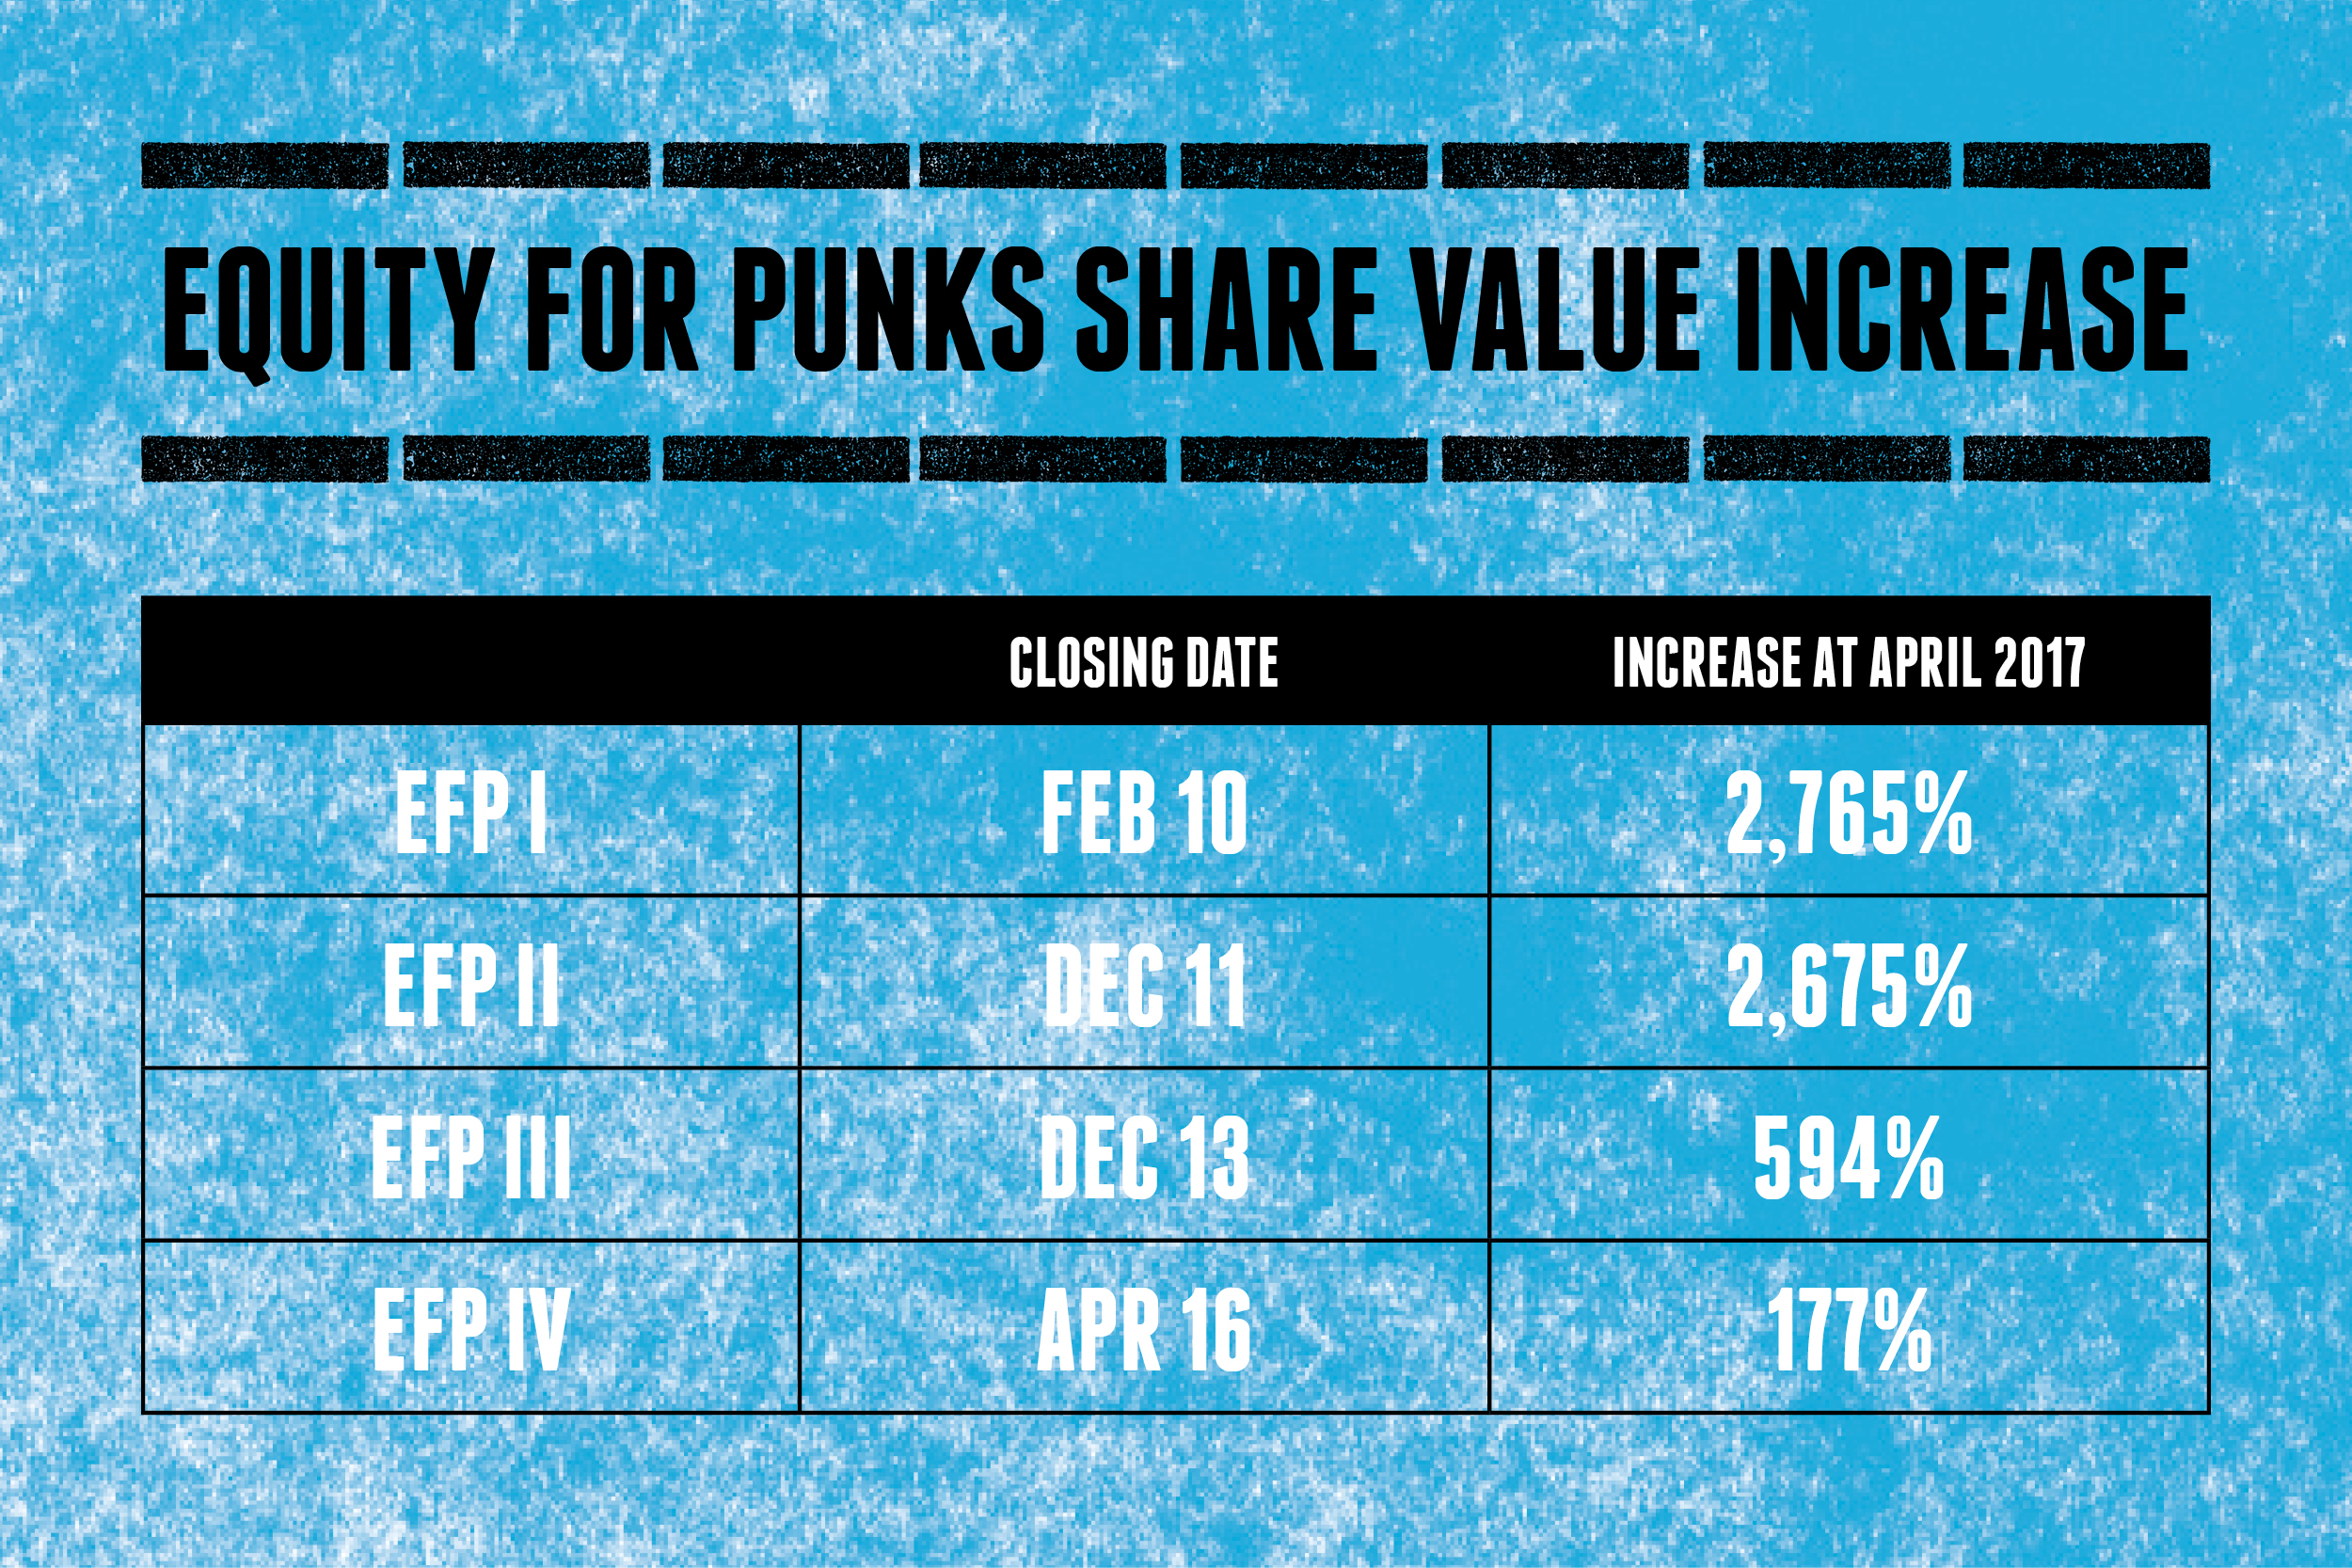 BrewDog's released a share value increase graphic.